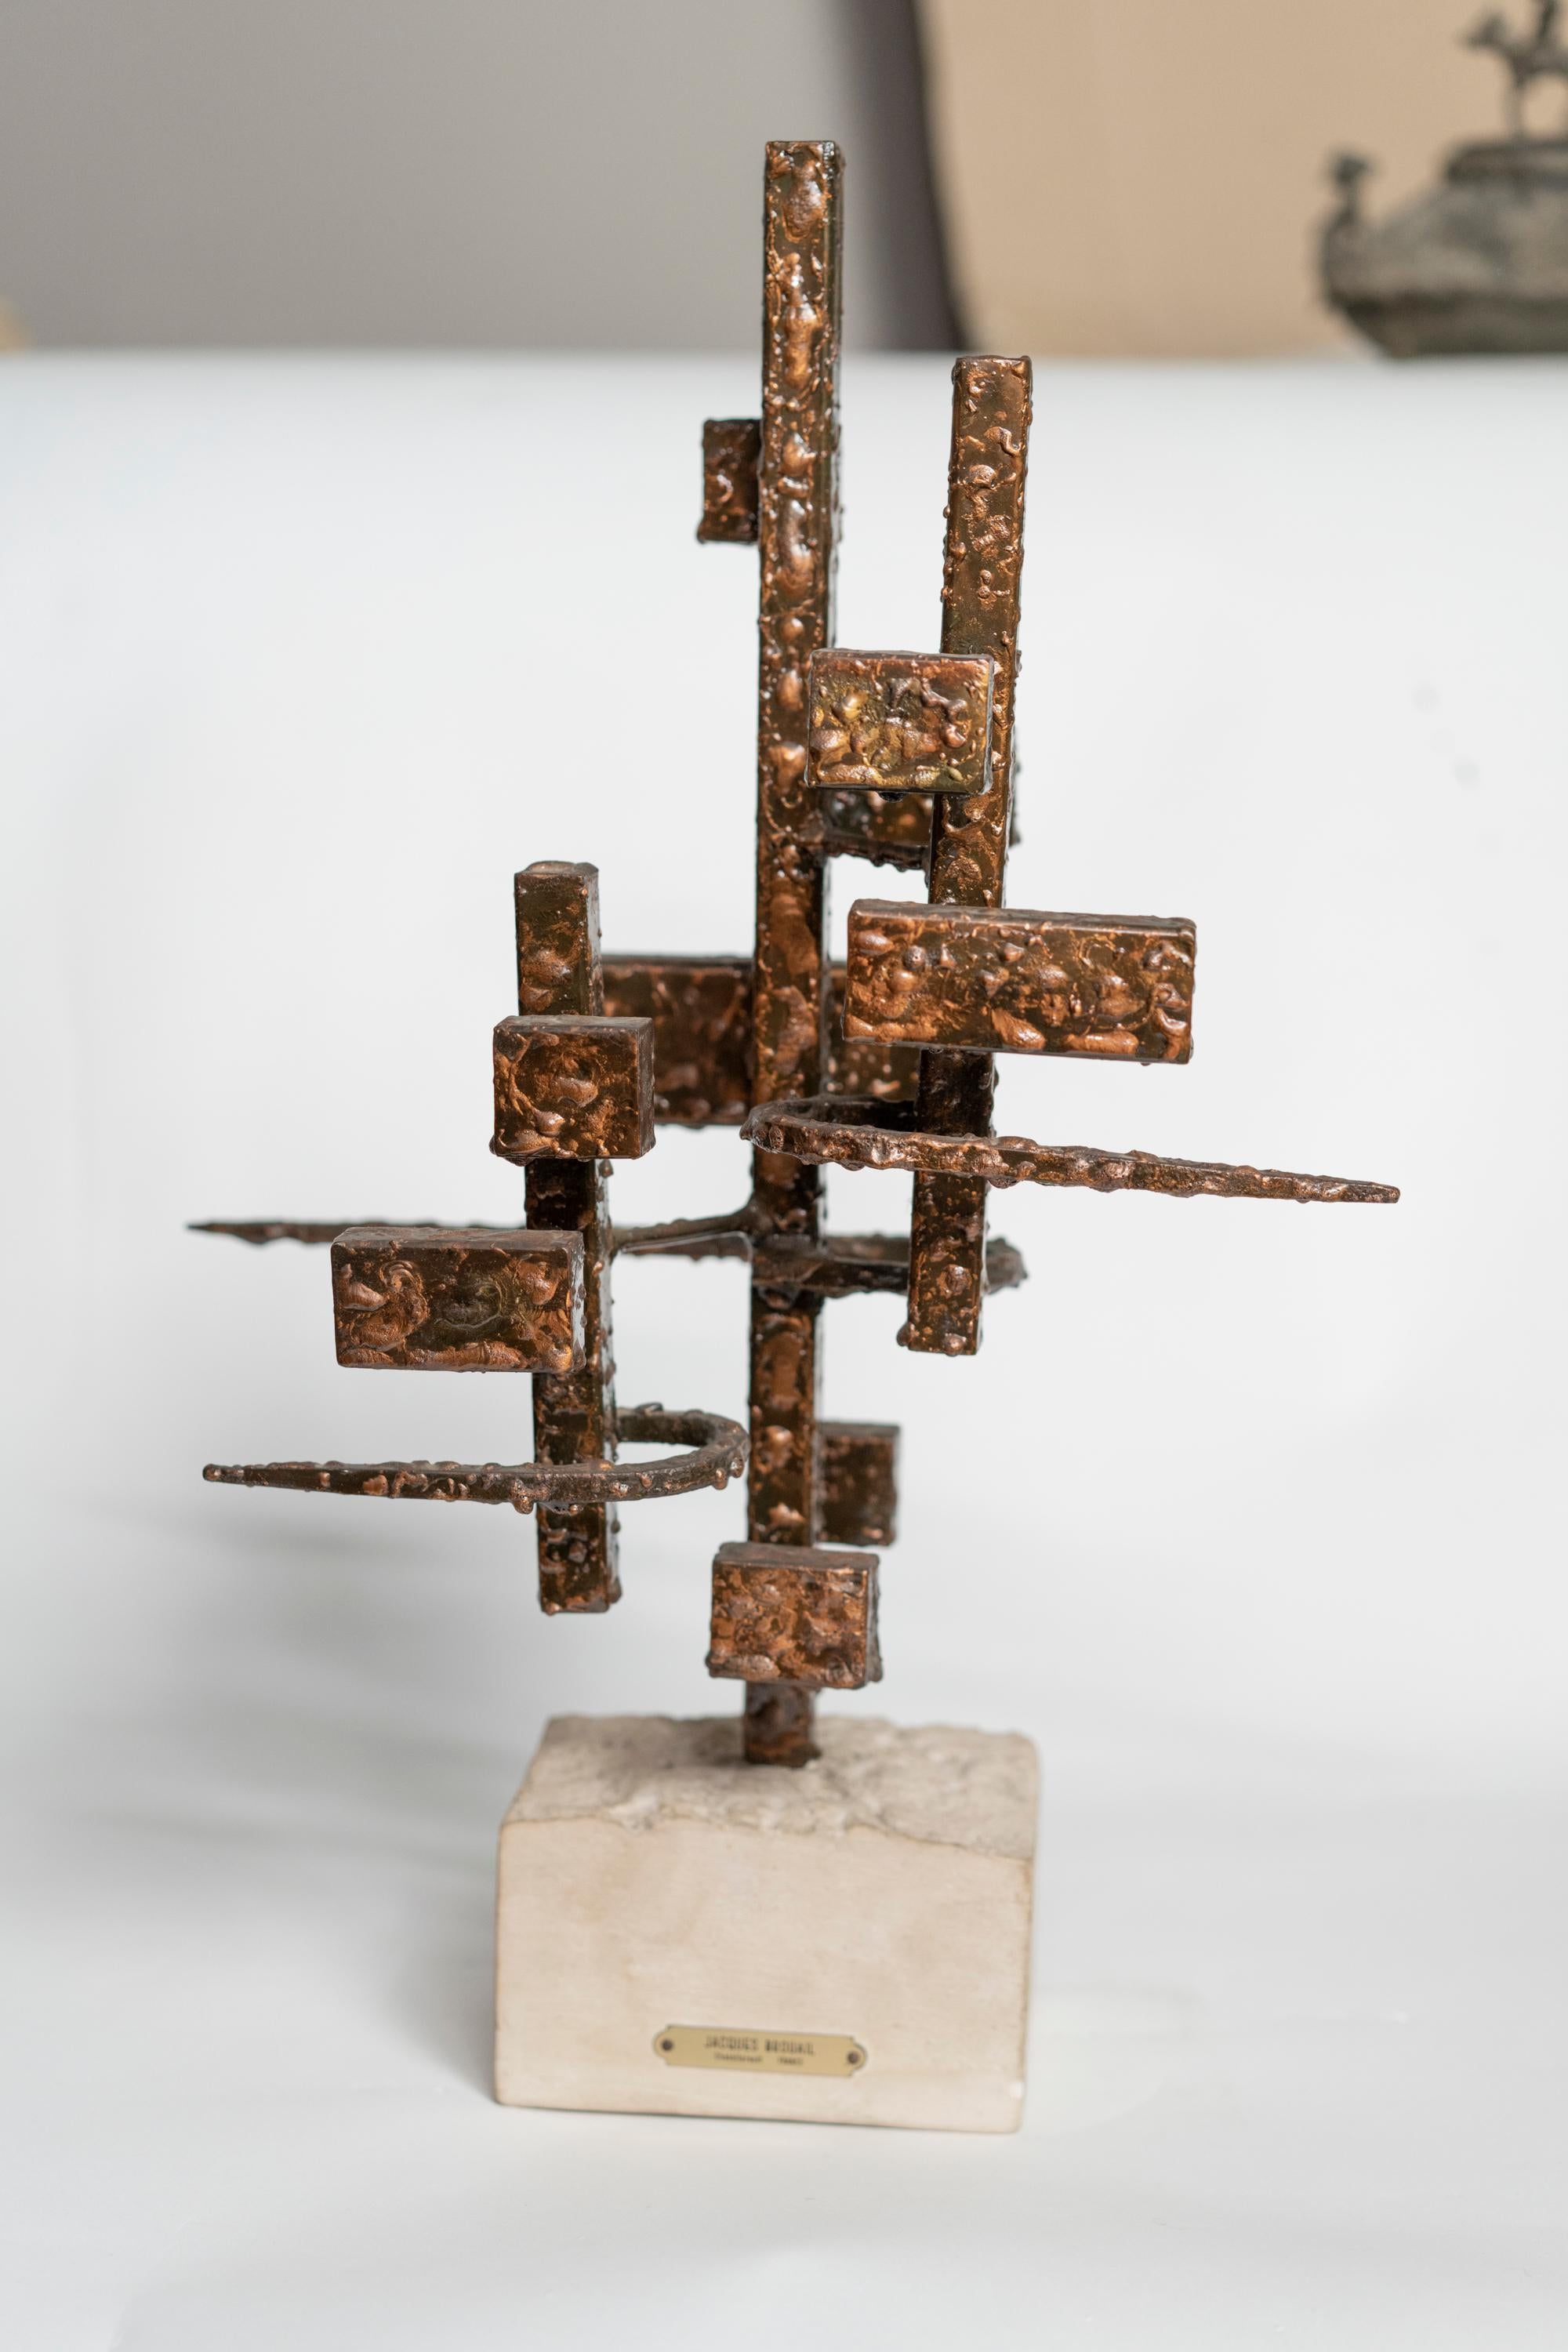 Abstract welded steel by Jacques Brouail, resting on stone base
Signed on brass plaque 